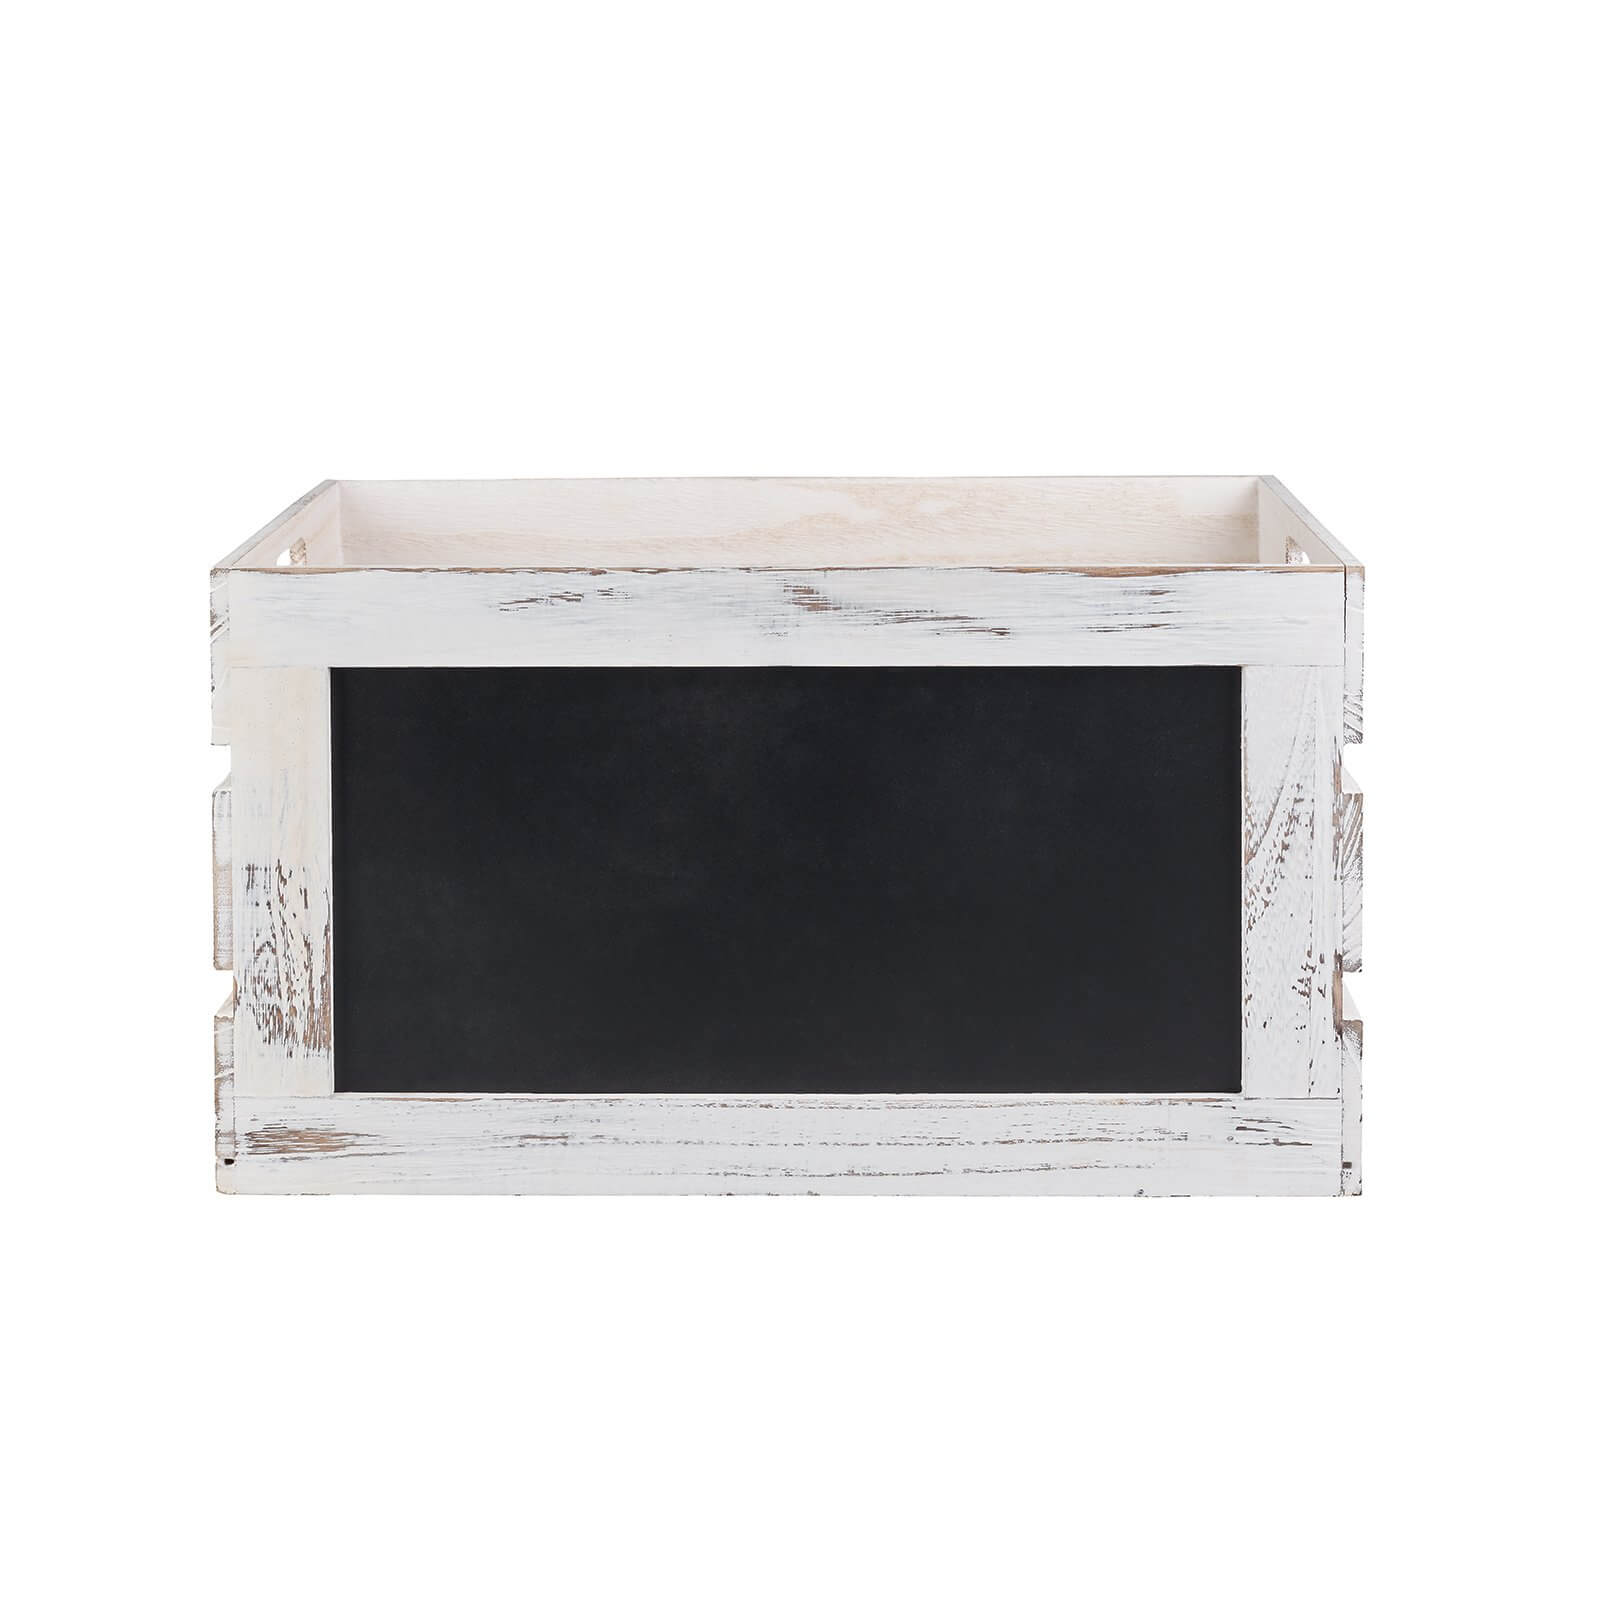 Whitewashed Wooden Crates with Chalkboard - Set of 3